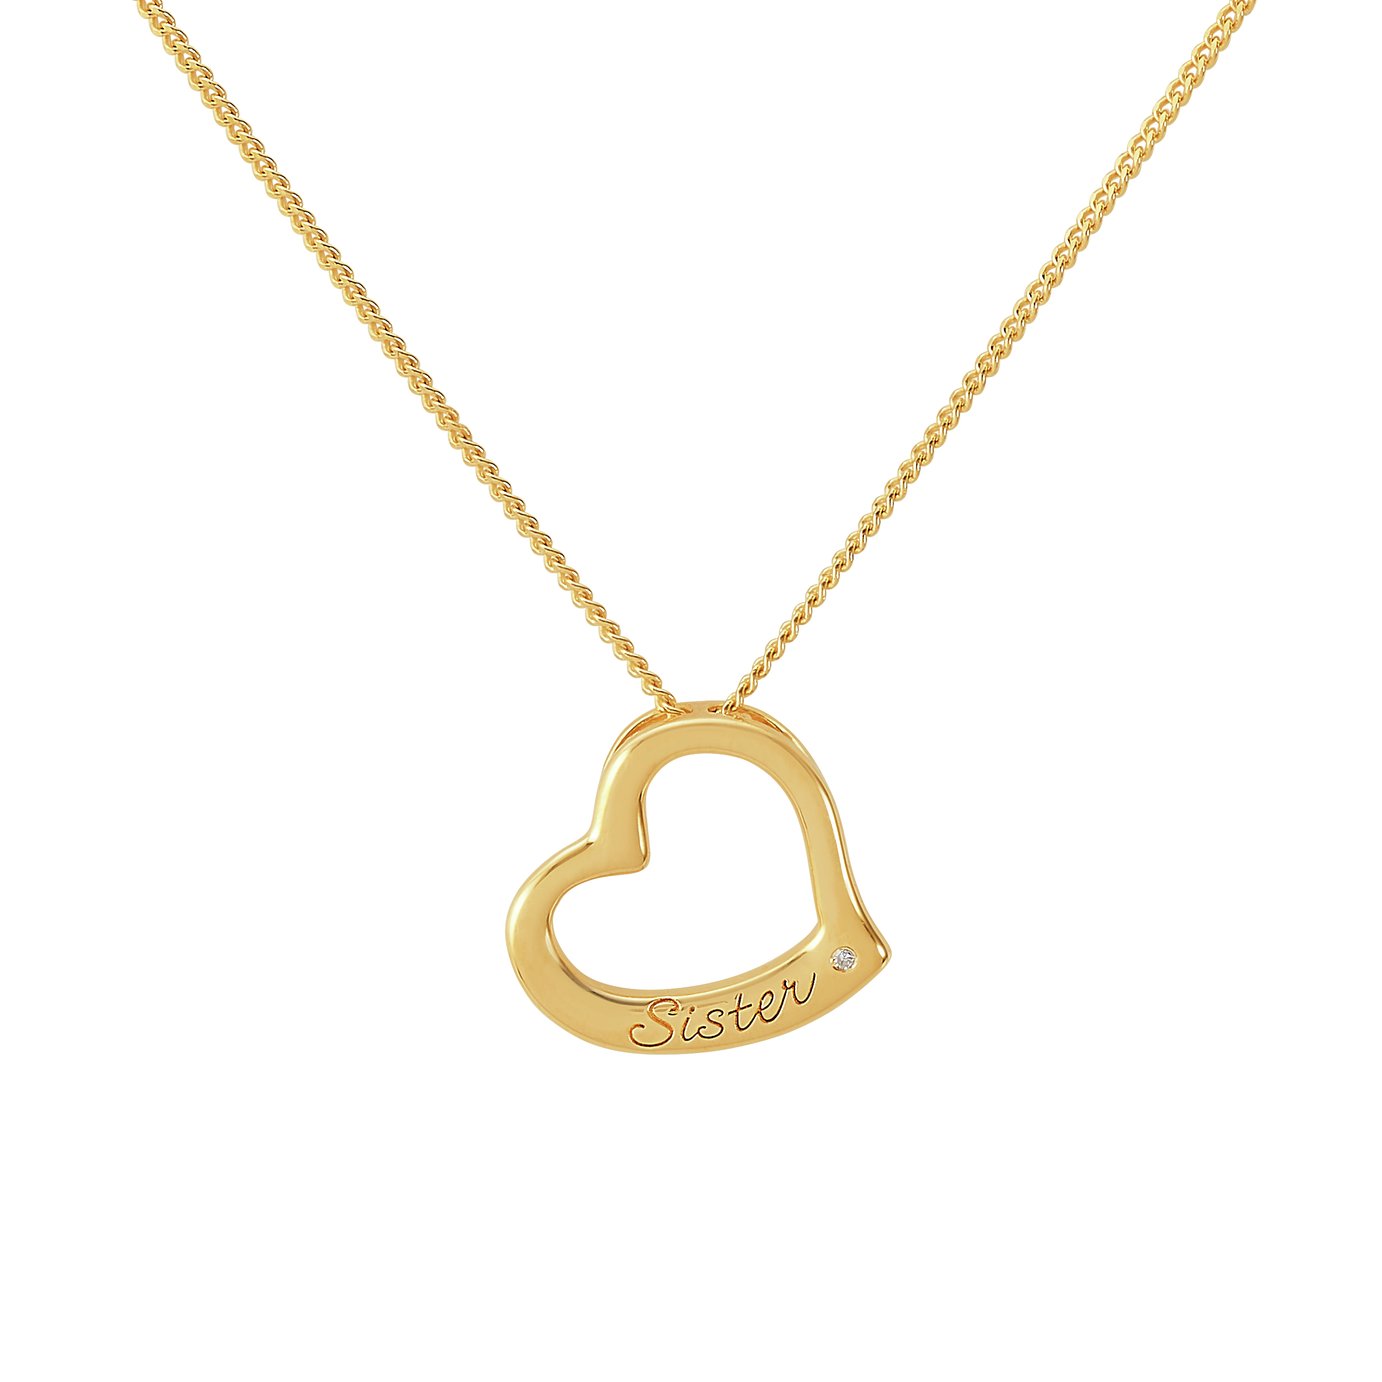 Revere Gold Plated Sister Heart Pendant 18 Inch Necklace